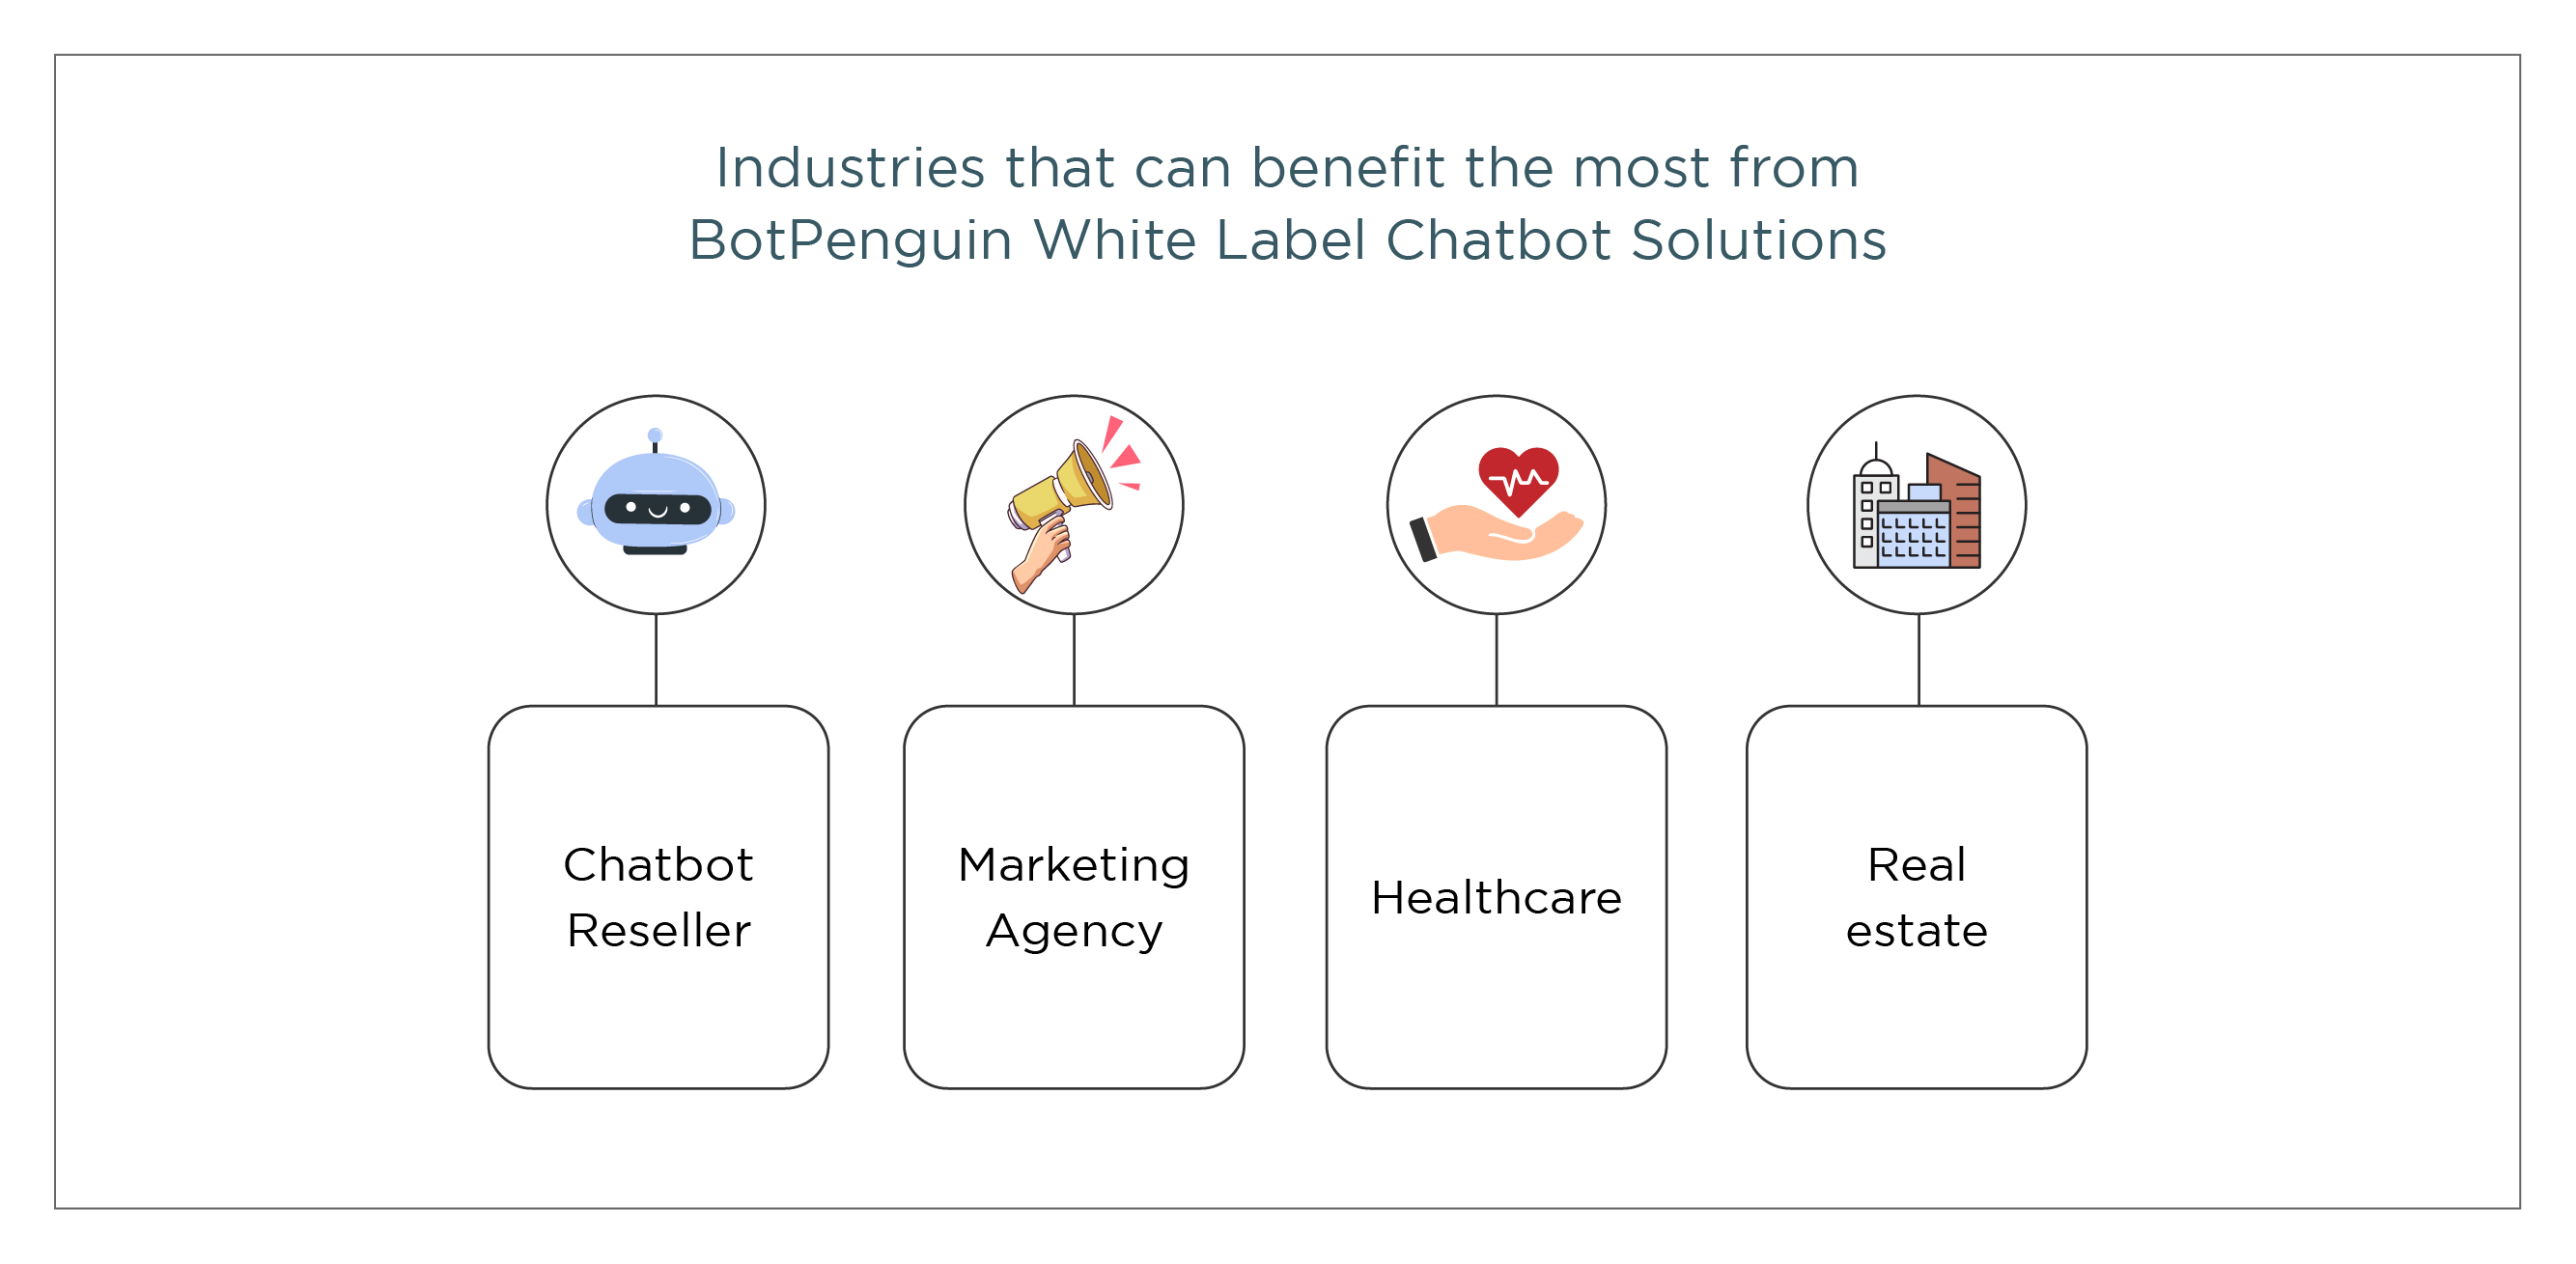 Which industries can benefit the most from BotPenguin White Label Chatbot Solutions?